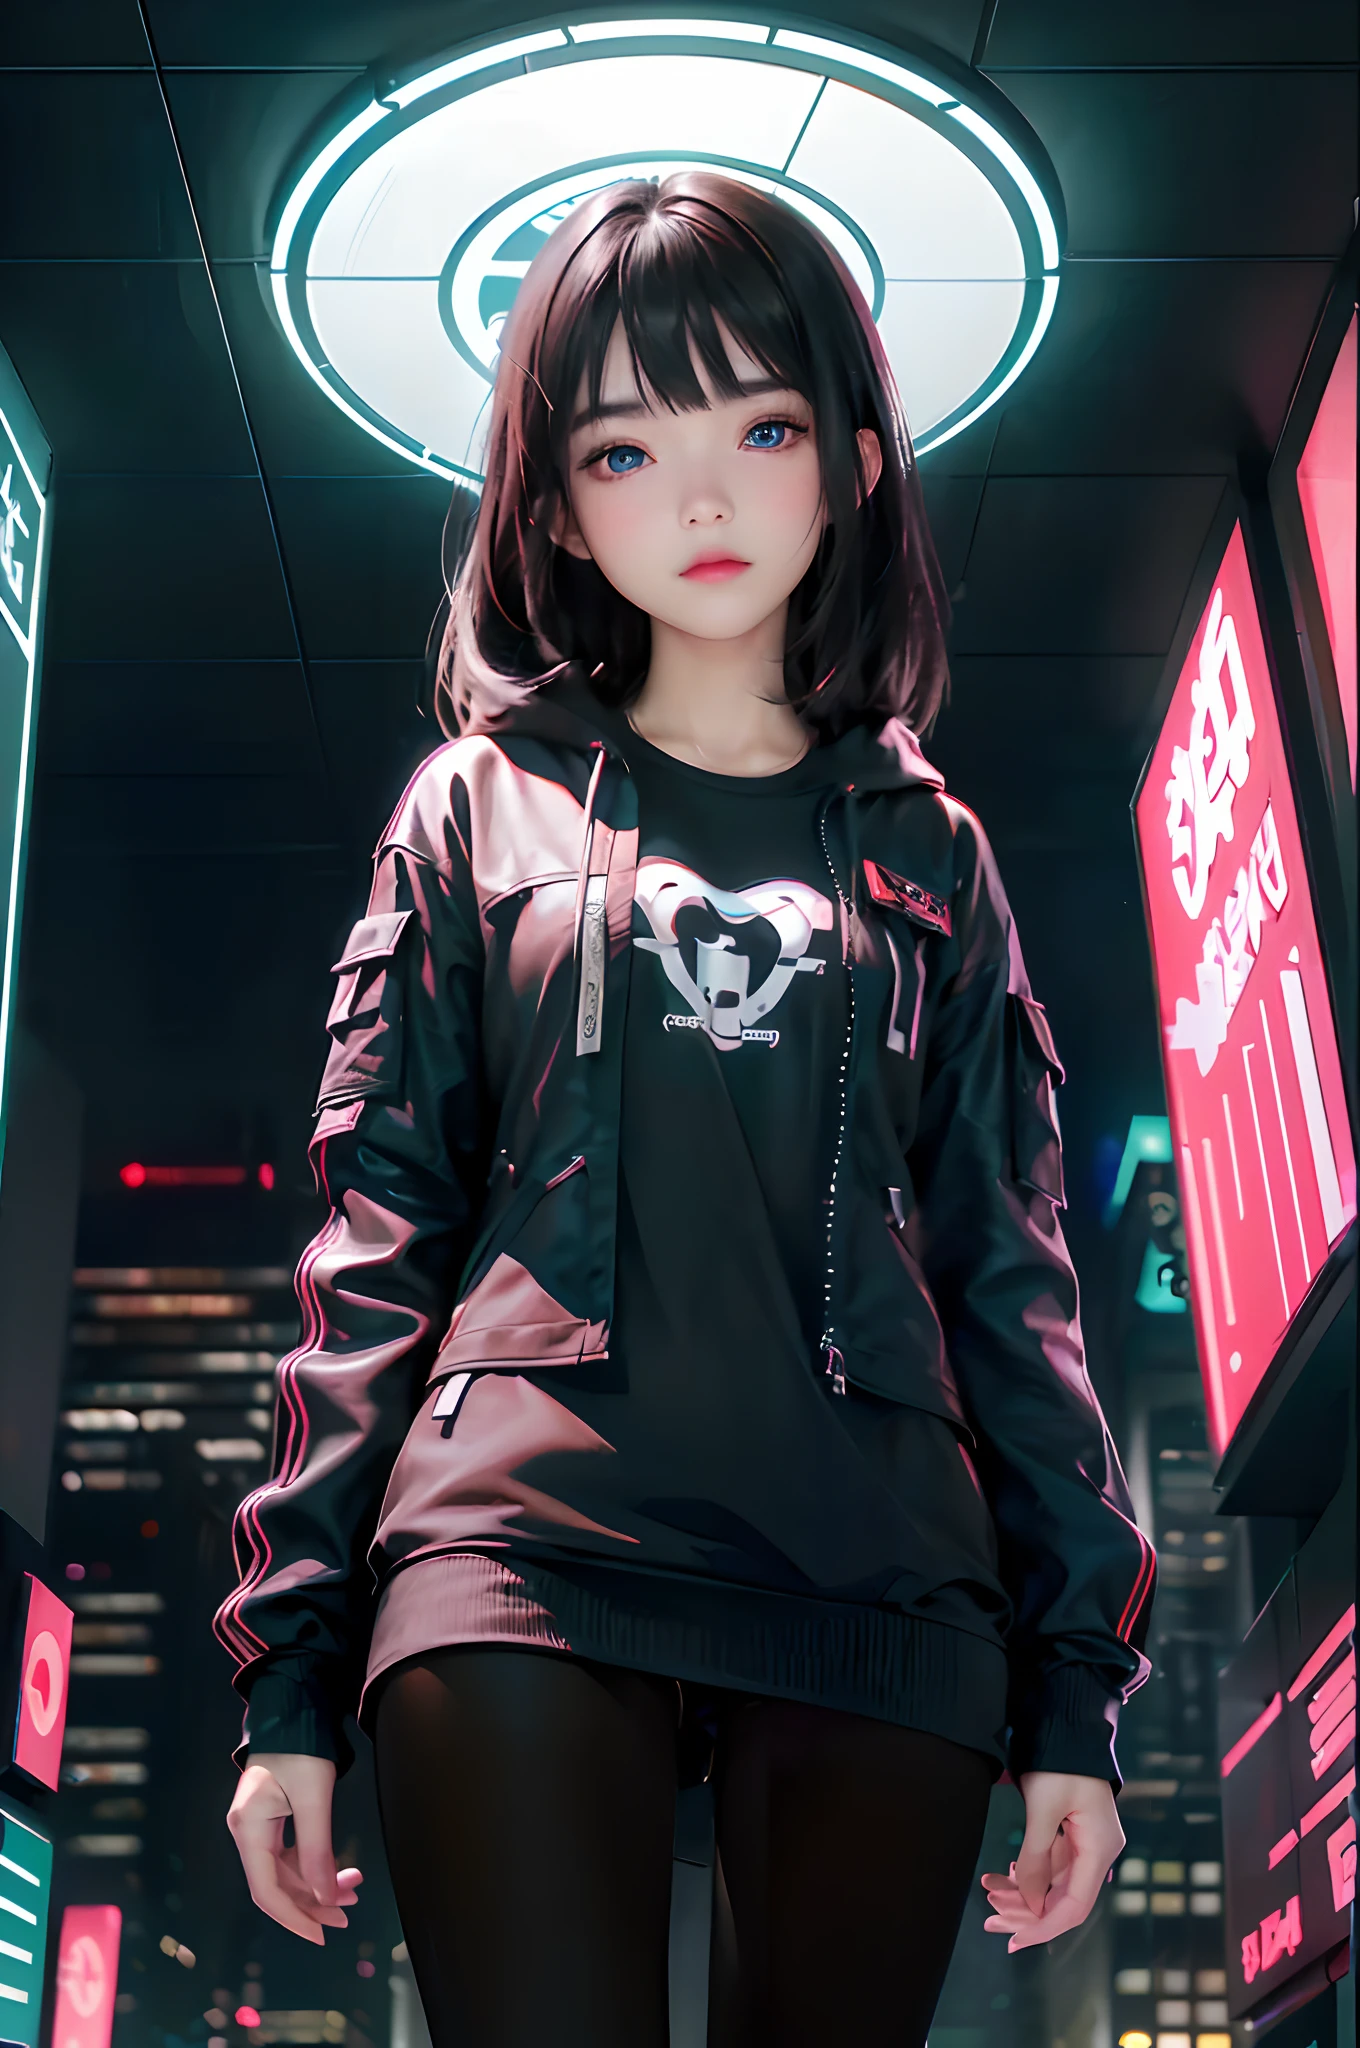 ((top-quality)), (((​masterpiece)), (detaileds: 1.4), 3D, Beautiful Cyberpunk Woman Image, bob cuts, Broken black tights, leather clothes, Electromechanical, nffsw(HighDynamicRange), Ray traching, NVIDIA RTX, Hyper-Resolution, Unreal 5, Sub-surface scattering, PBR Texture, Postprocess, Anisotropy Filtering, depth of fields, Maximum sharpness and acutance, Multilayer Texture, Albedo and Highlight Maps, Surface Coloring, Accurate simulation of light-material interactions, perfectly proportions、octane renderings、two tone lighting、Large aperture、Low ISO、White Balance、thirds rule、8K Raw、​masterpiece、top-quality、(8k extremely detailed CG unit wallpaper)(top-quality)、(The best illustrations)、(Best Shadows), innocent blue eyes, long hair, big titt